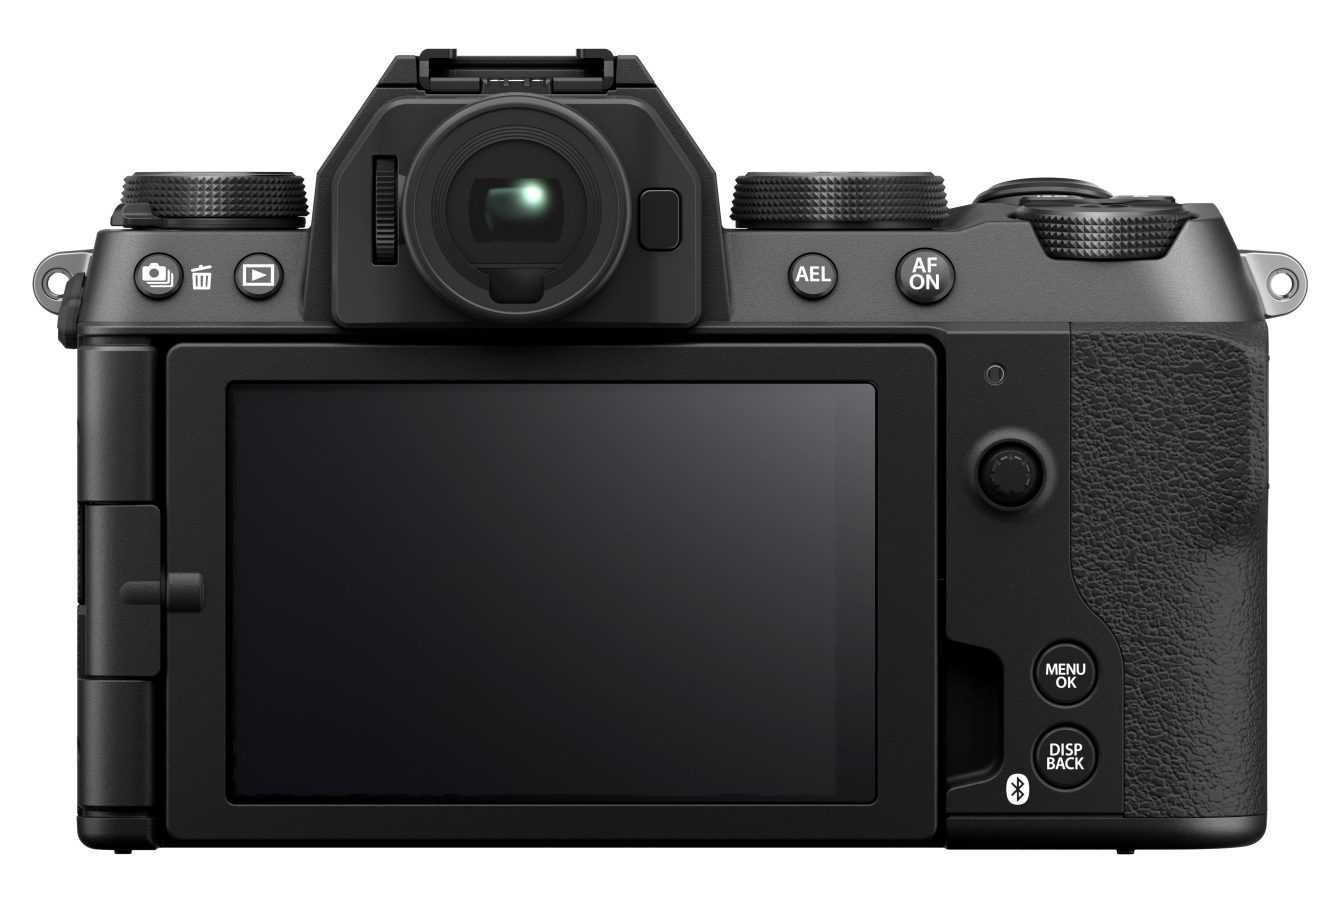 FUJIFILM X-S20: preview and first impressions